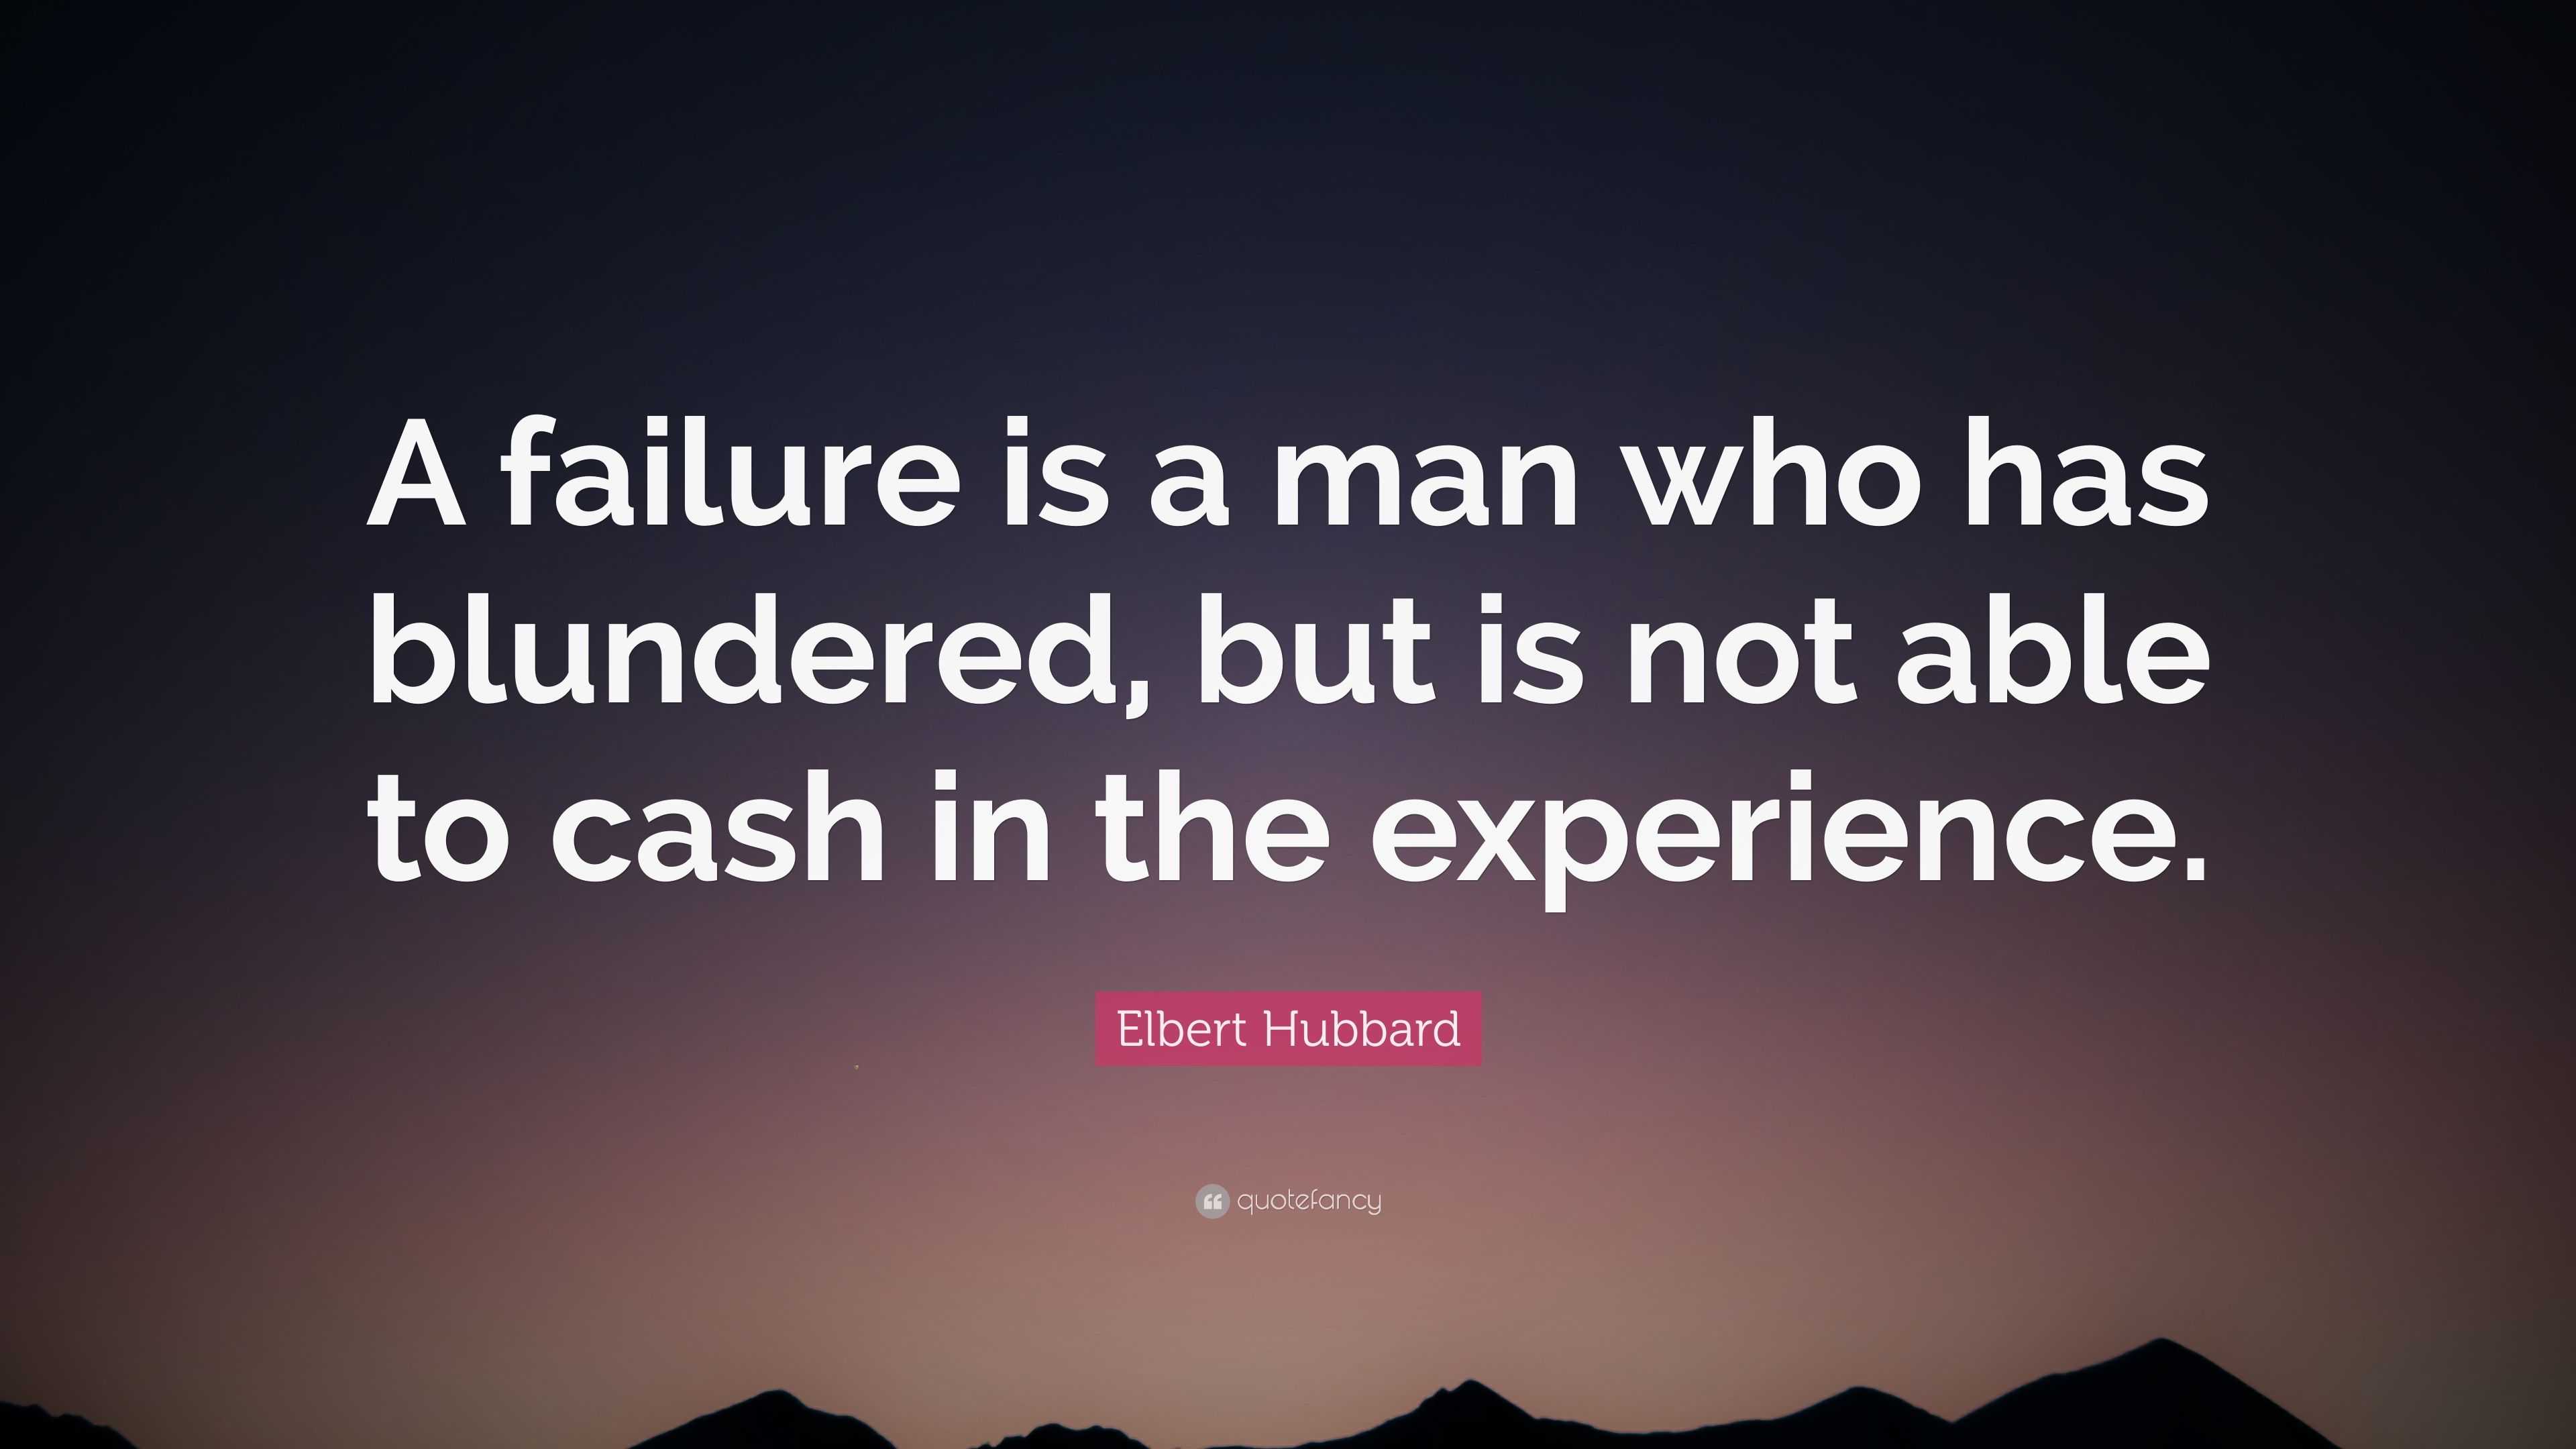 A failure is a man who has blundered, but is not able to cash in